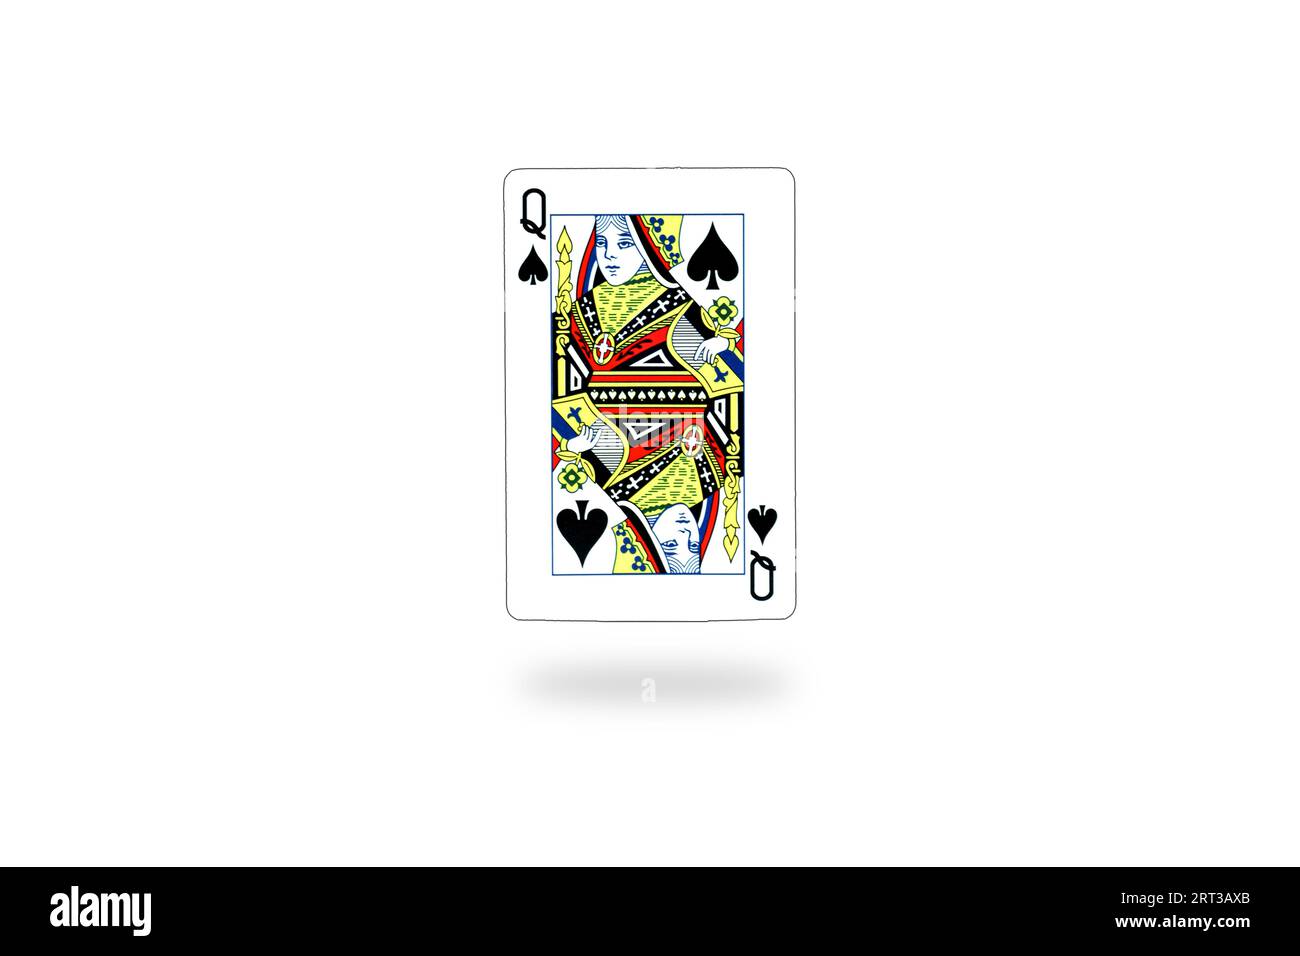 Queen Playing card in a plain white background stock photo Stock Photo